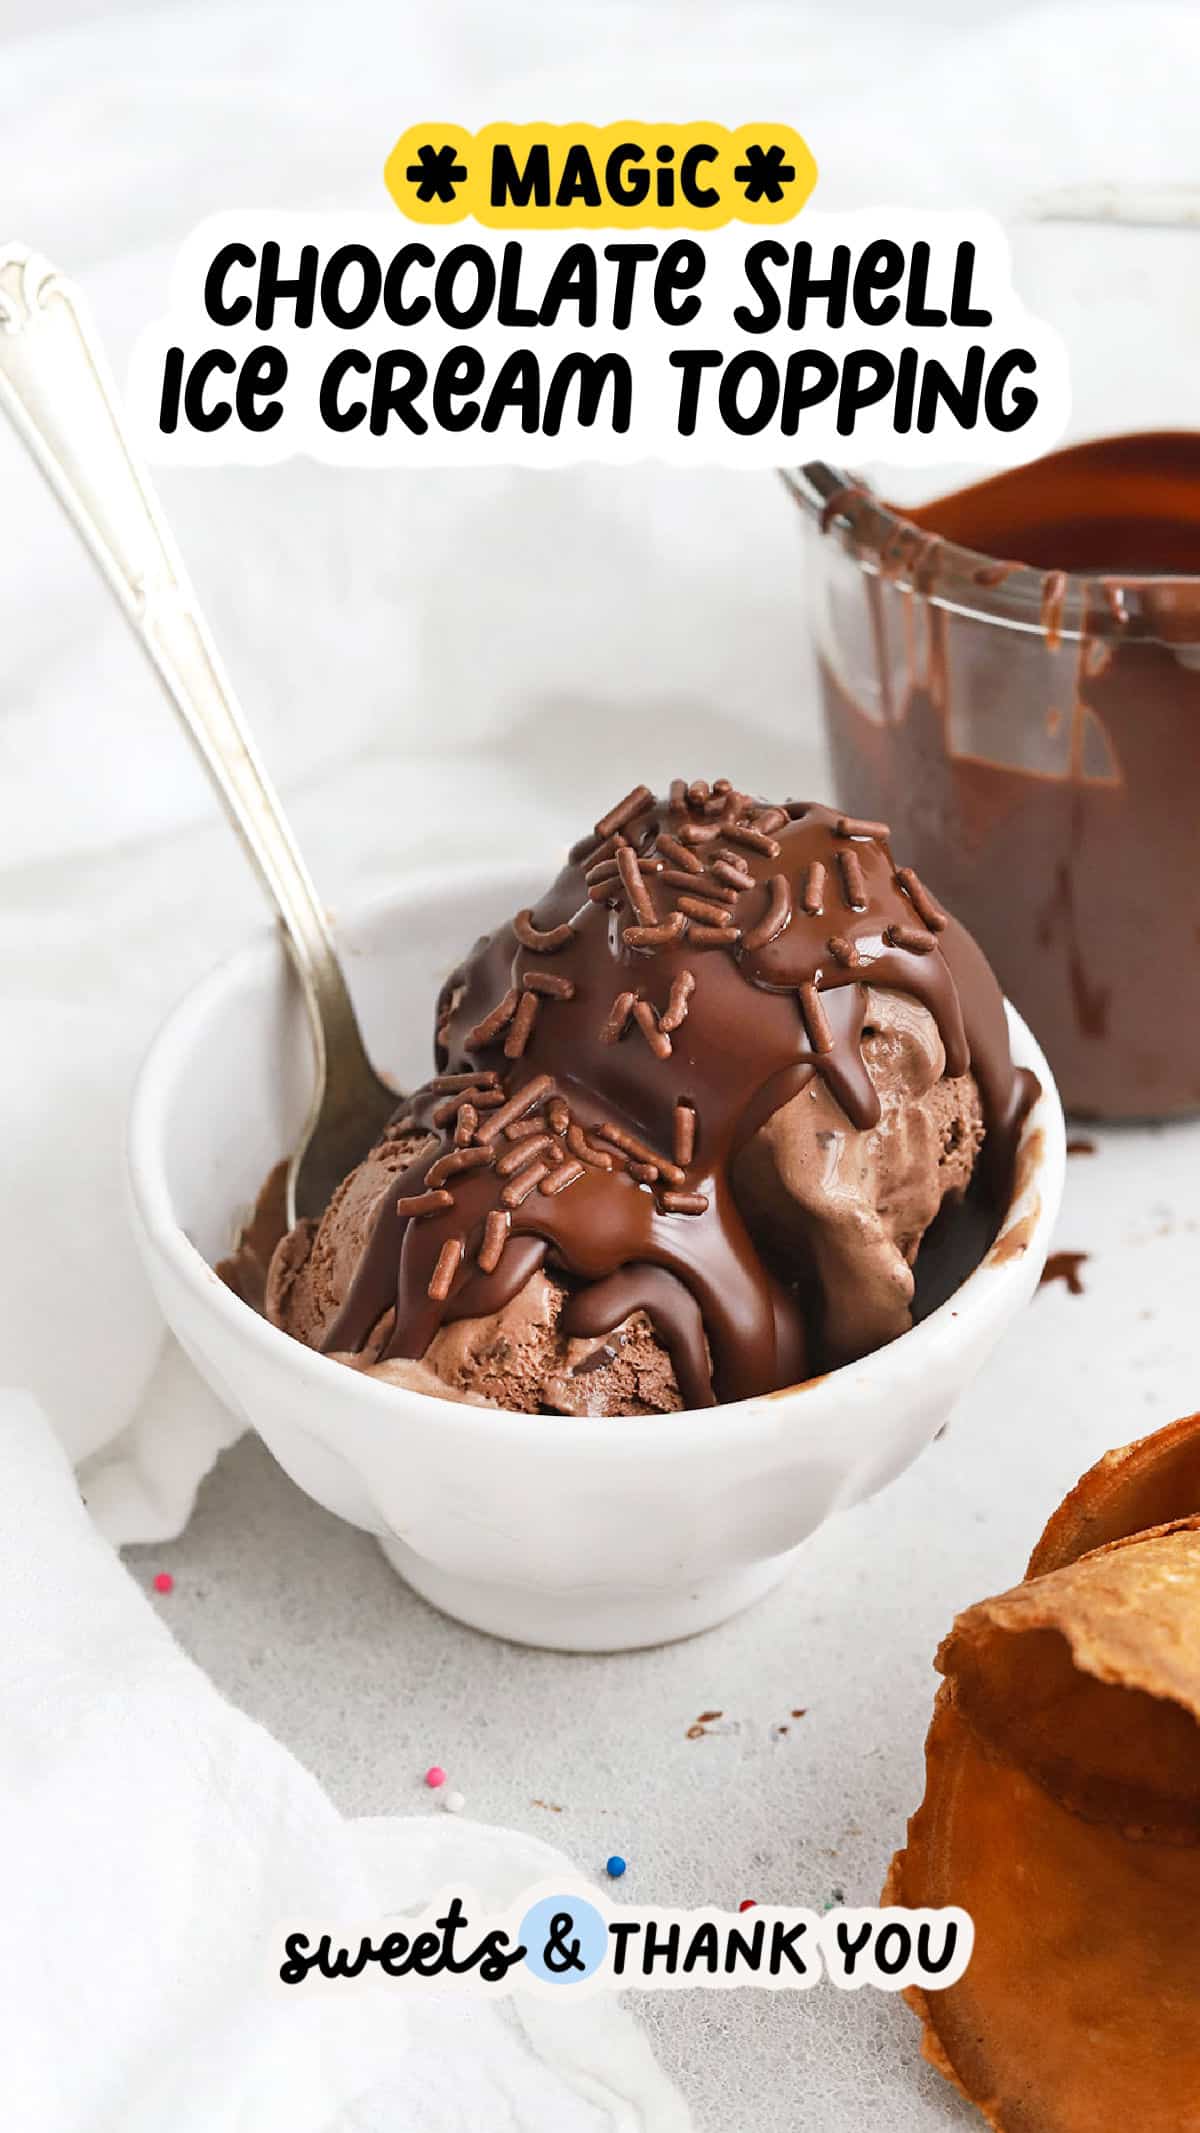 This summer, you have to try our easy 2-Ingredient Chocolate Shell For Ice Cream! This homemade magic shell topping recipe adds a perfect chocolatey crunch to your favorite scoop of ice cream! This yummy ice cream topping works perfectly on ice cream cones, sundaes, and other frozen treats (like banana pops, homemade trufru, and more). Best of all, you can easily make it as vegan chocolate shell using dairy-free chocolate chips! 